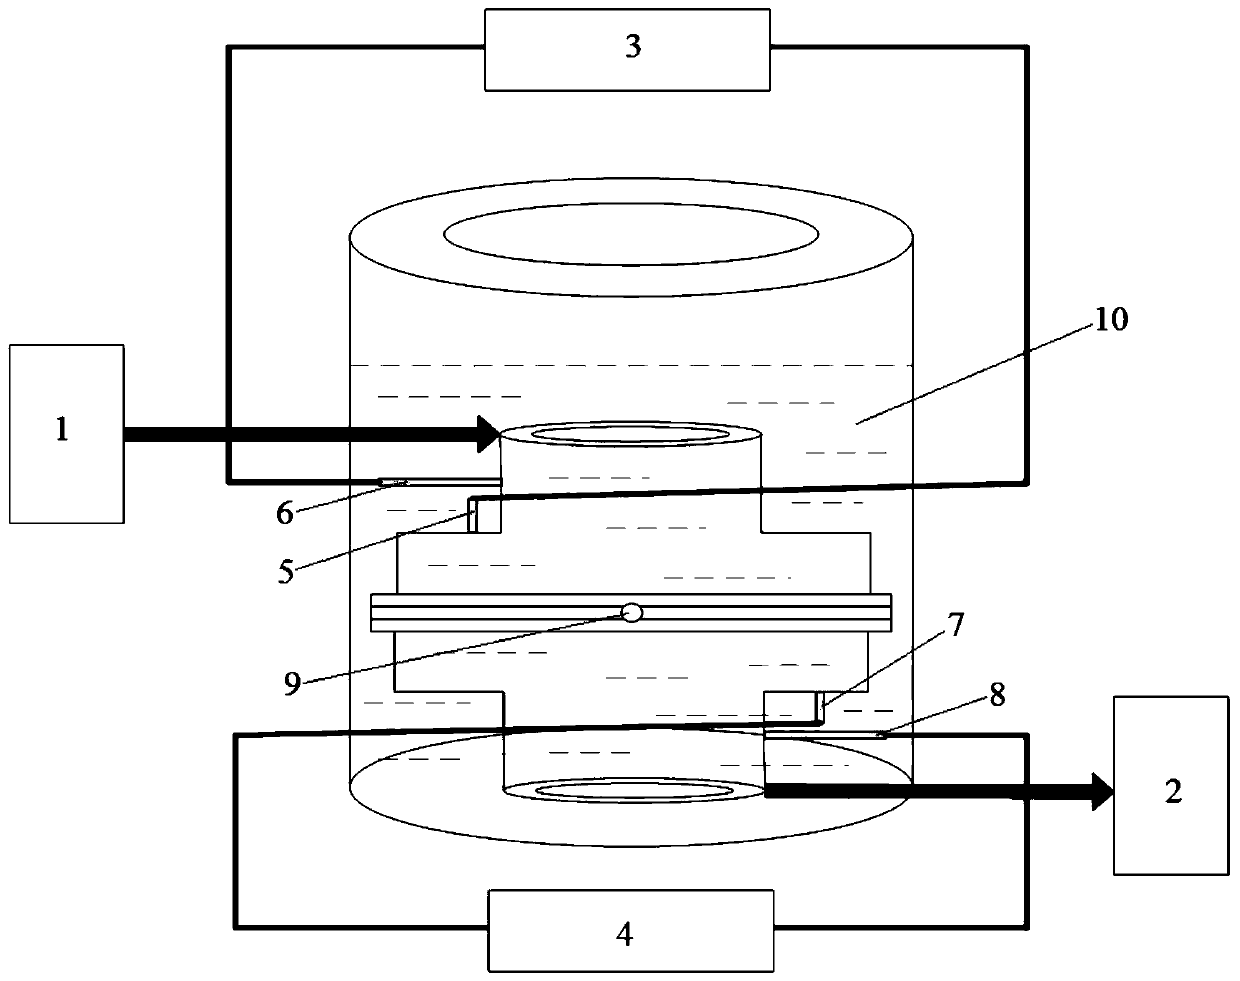 A detection device and method for measuring partial discharge under temperature gradient